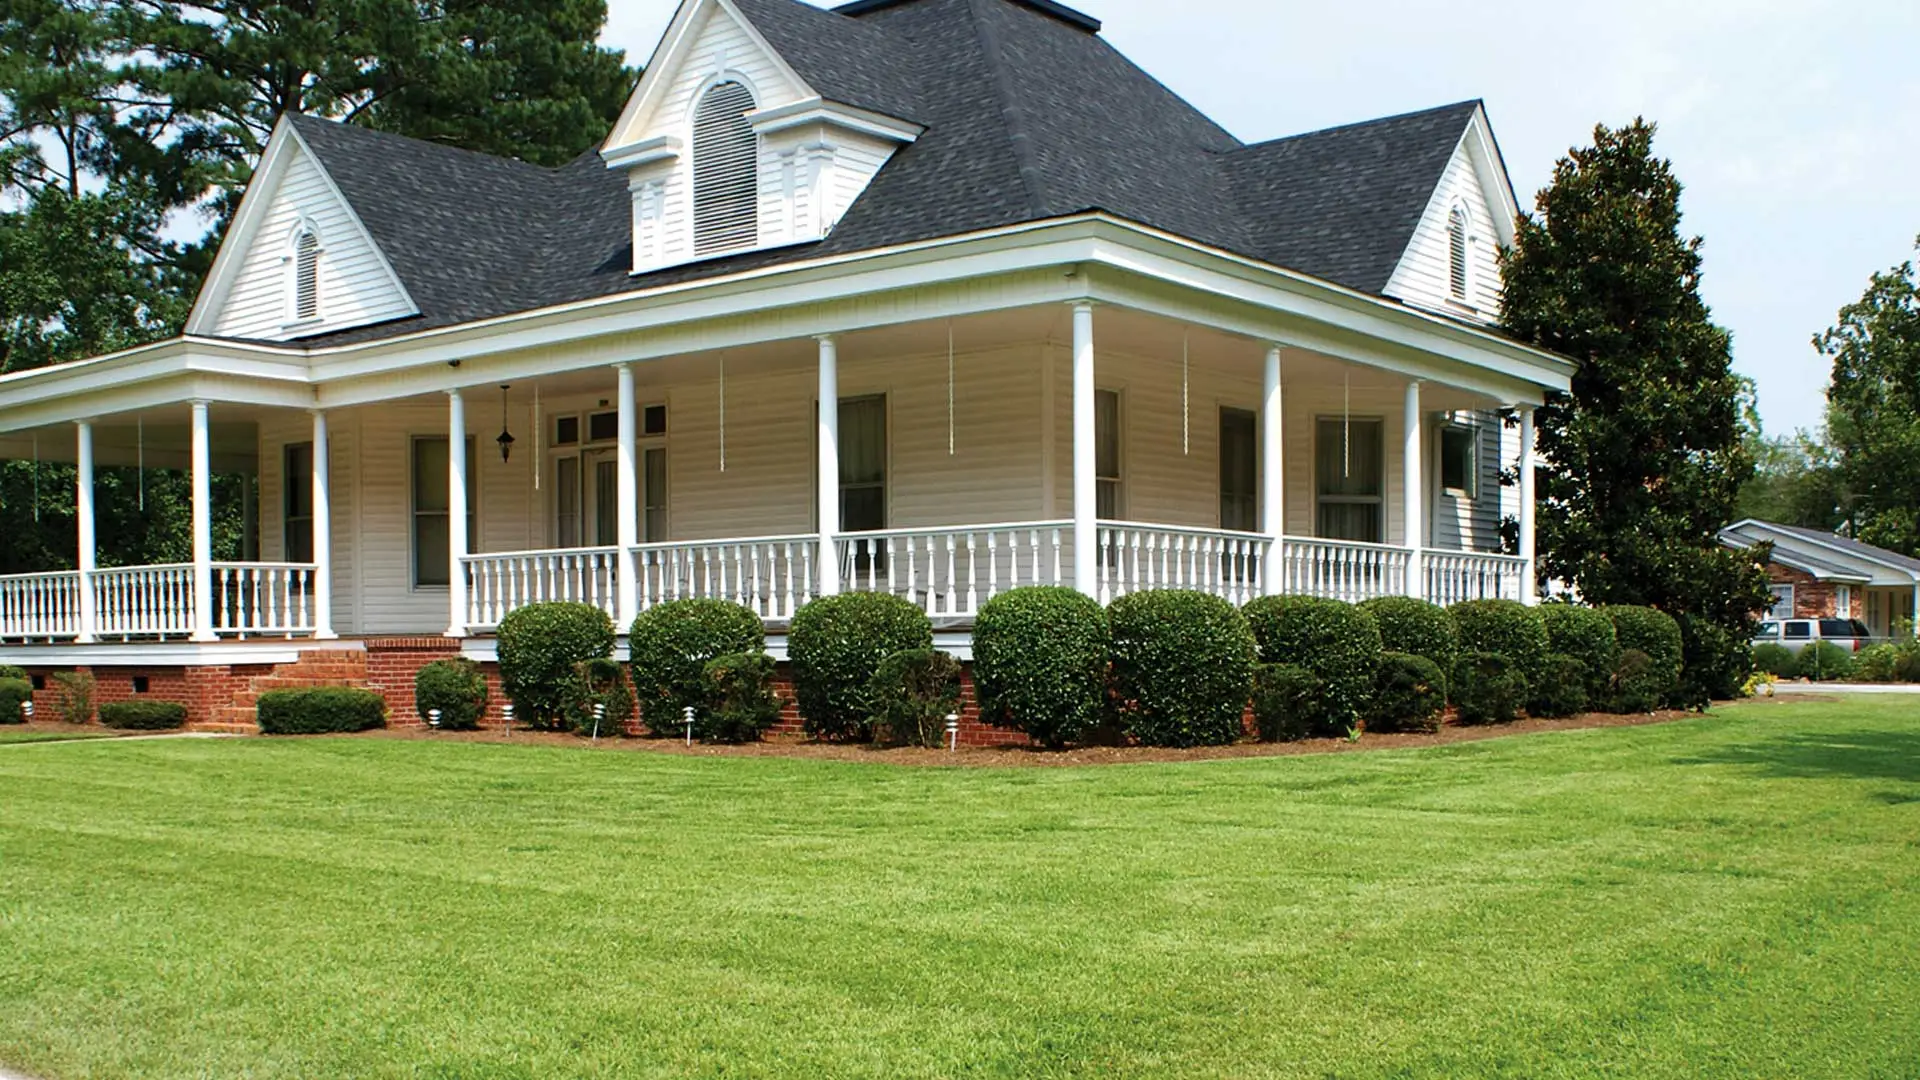 Home in Louisville, GA that we landscaped and provide lawn care.